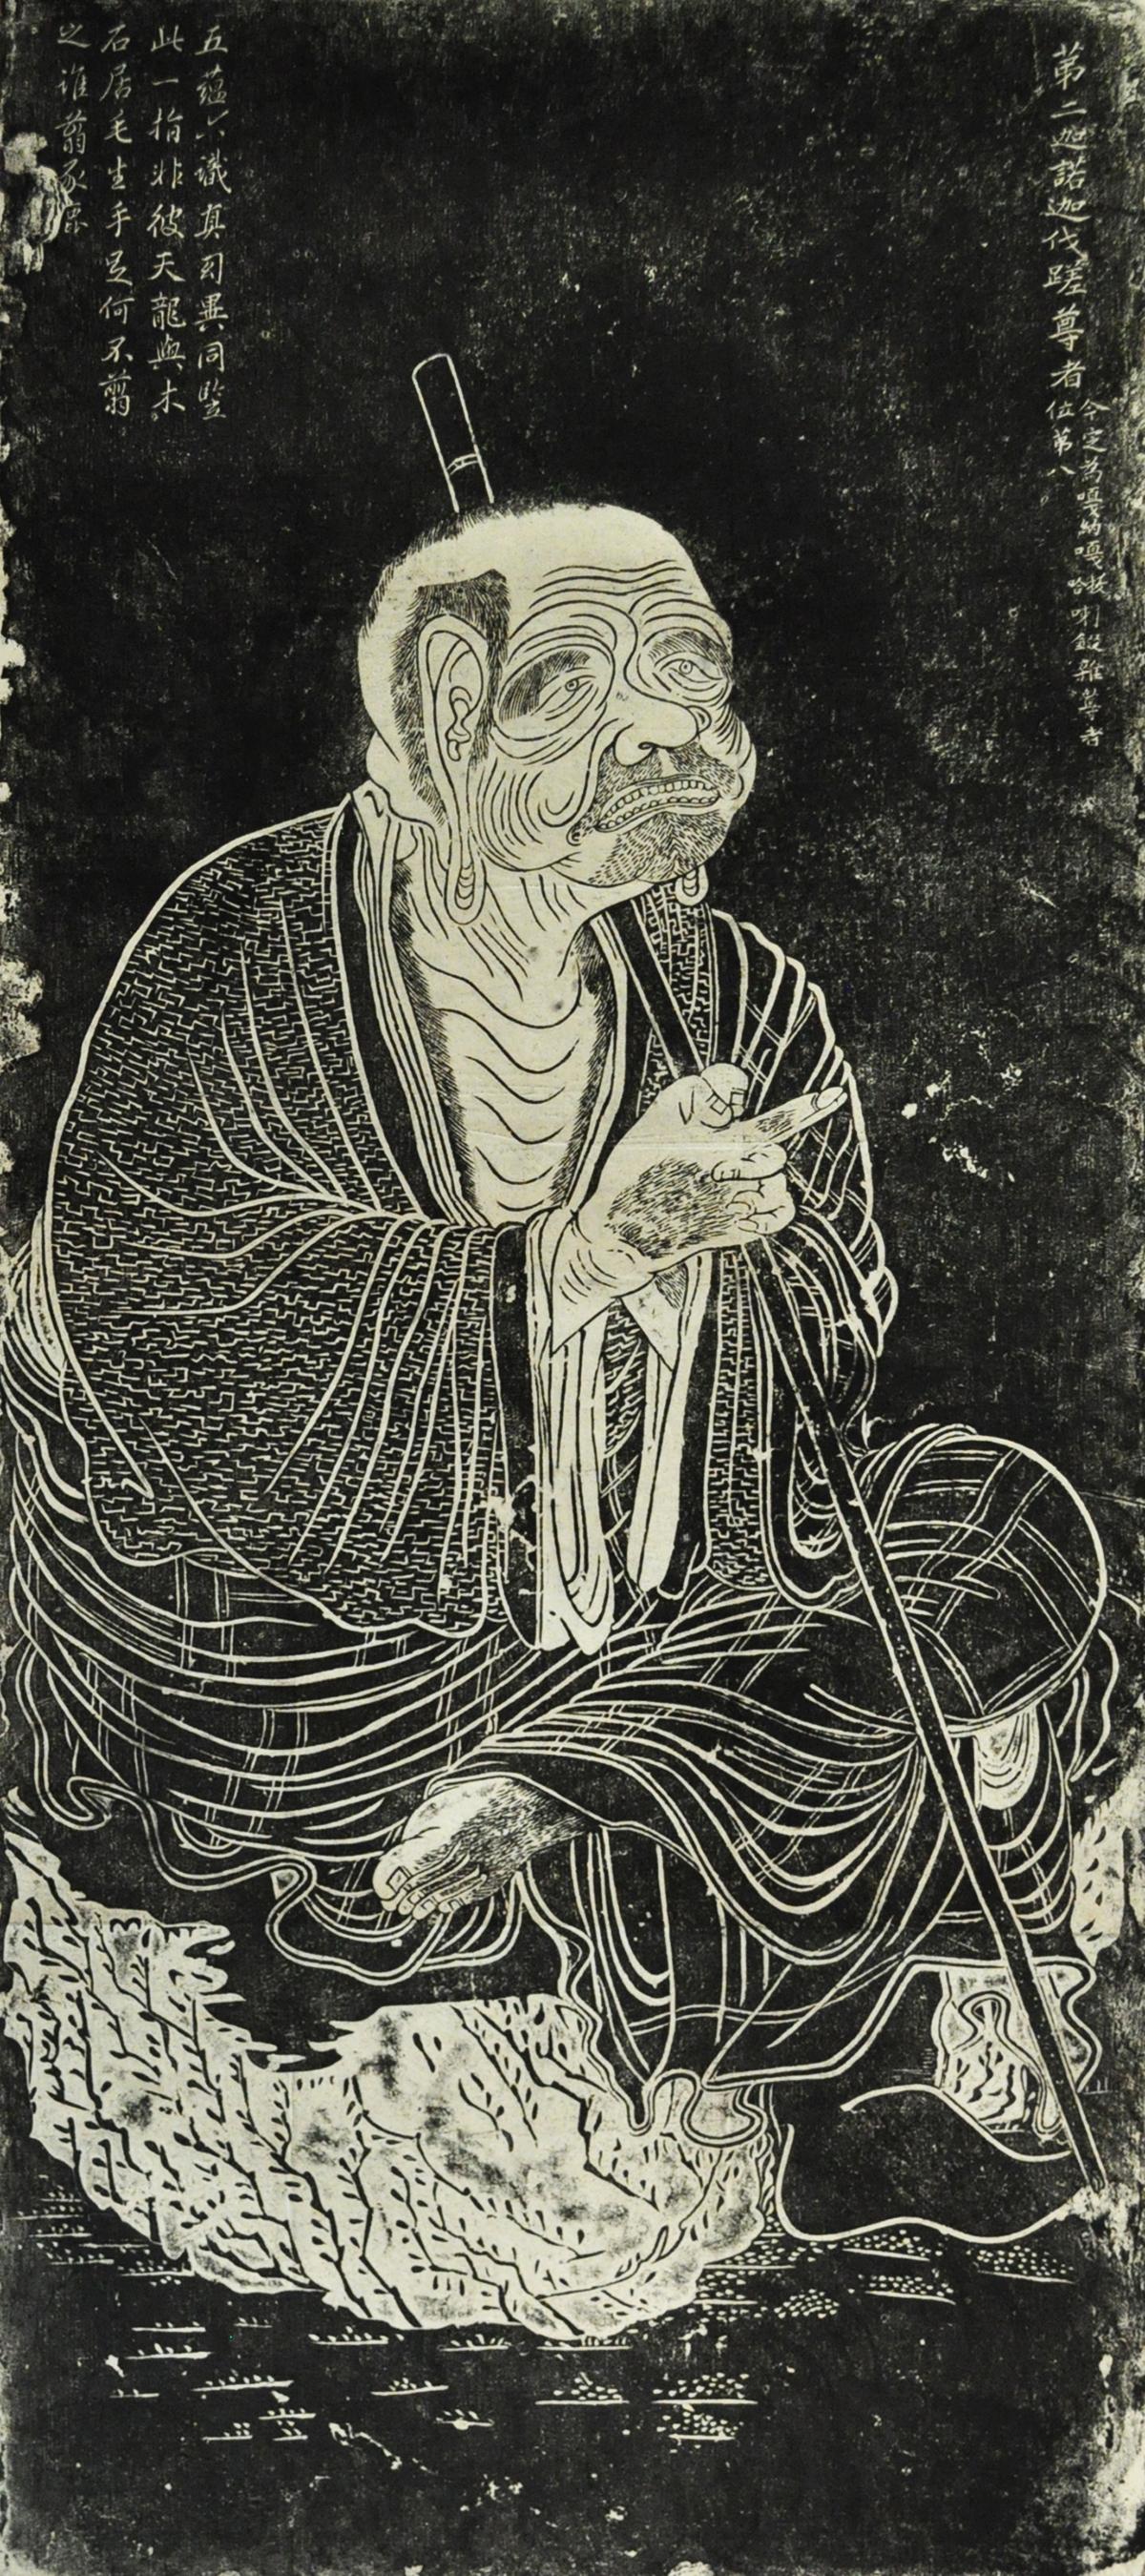 A collection of hand drawn rubbings of the portraits of Luohans from original engraved stone tablets that were commissioned in 1764 by the Chinese emperor Qianlong. The engravings were done in tribute and as preservation of the remarkable paintings